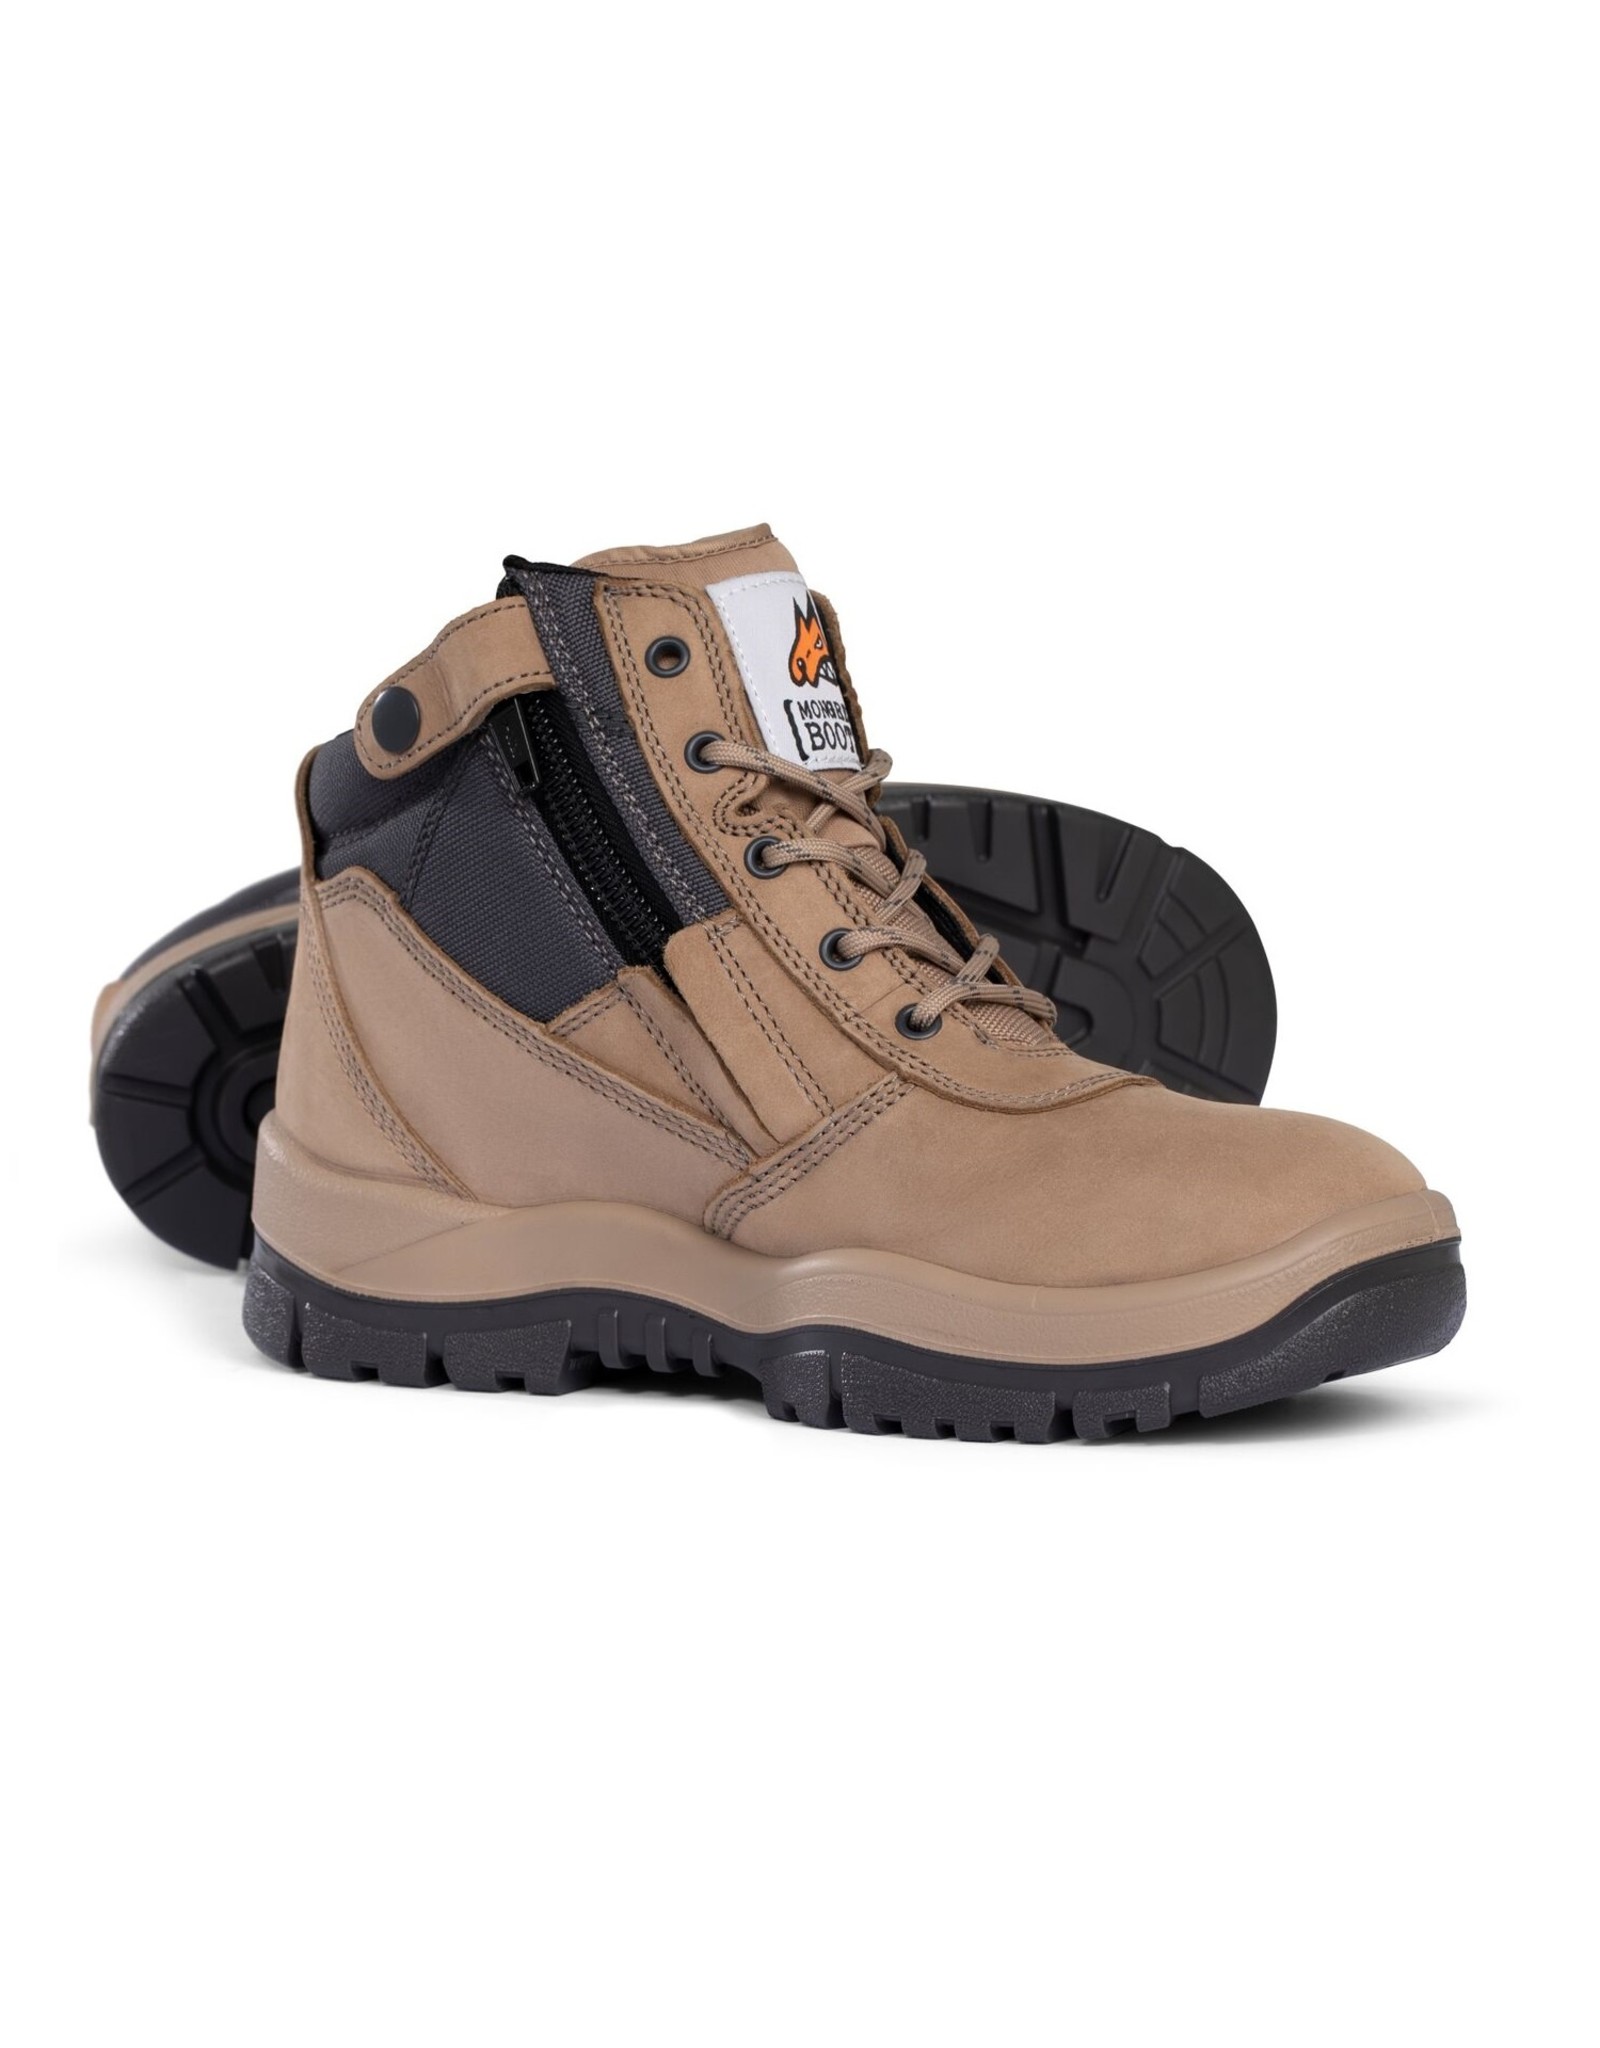 Mongrel Mongrel 261060 'P' Series Zip Sided Stone Safety Boot